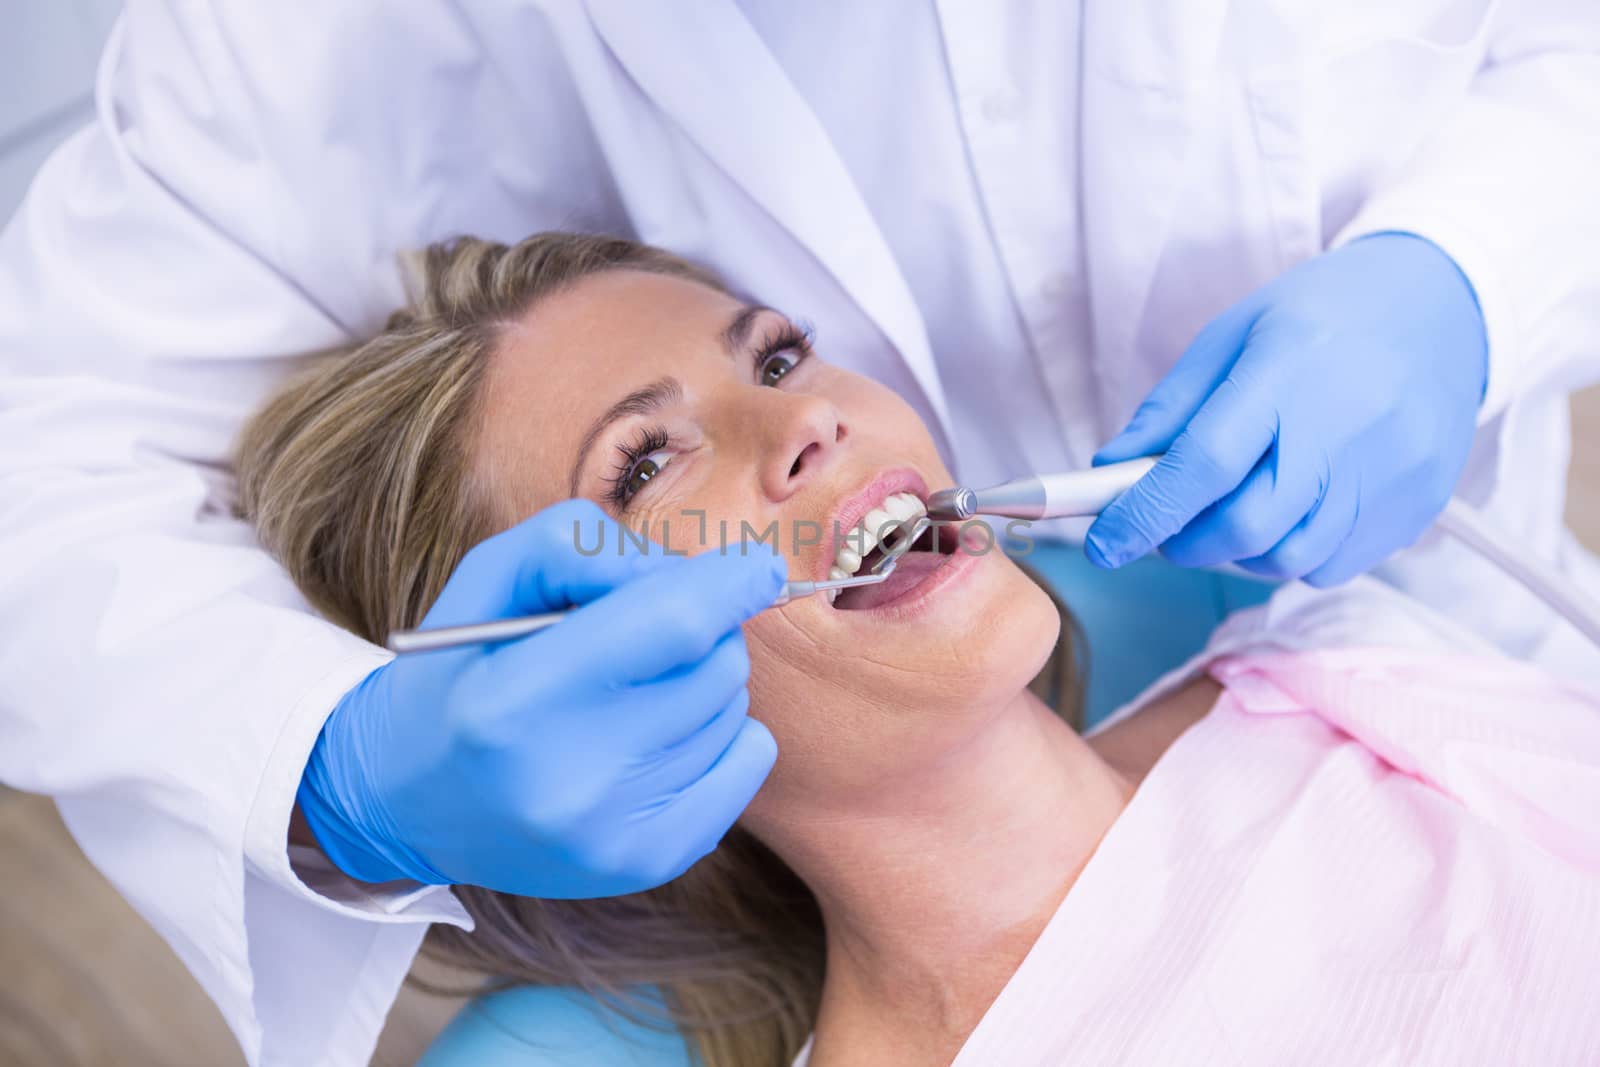 Dentist holding angled mirror while treating woman at medical clinic by Wavebreakmedia